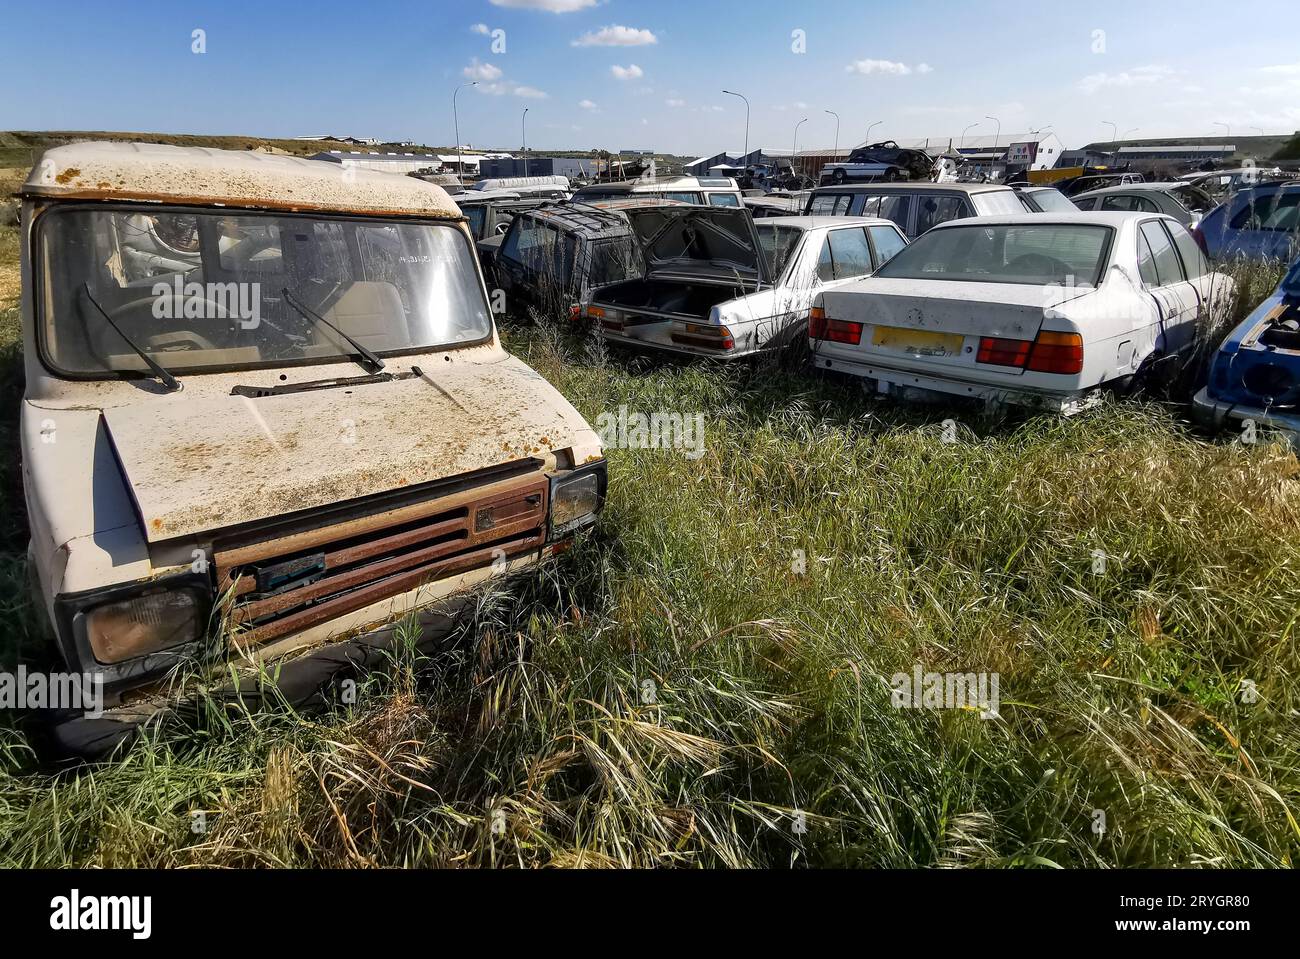 Car junkyard outdoor with wreck of a destroyed cars. Environmental pollution metal recycling. Stock Photo